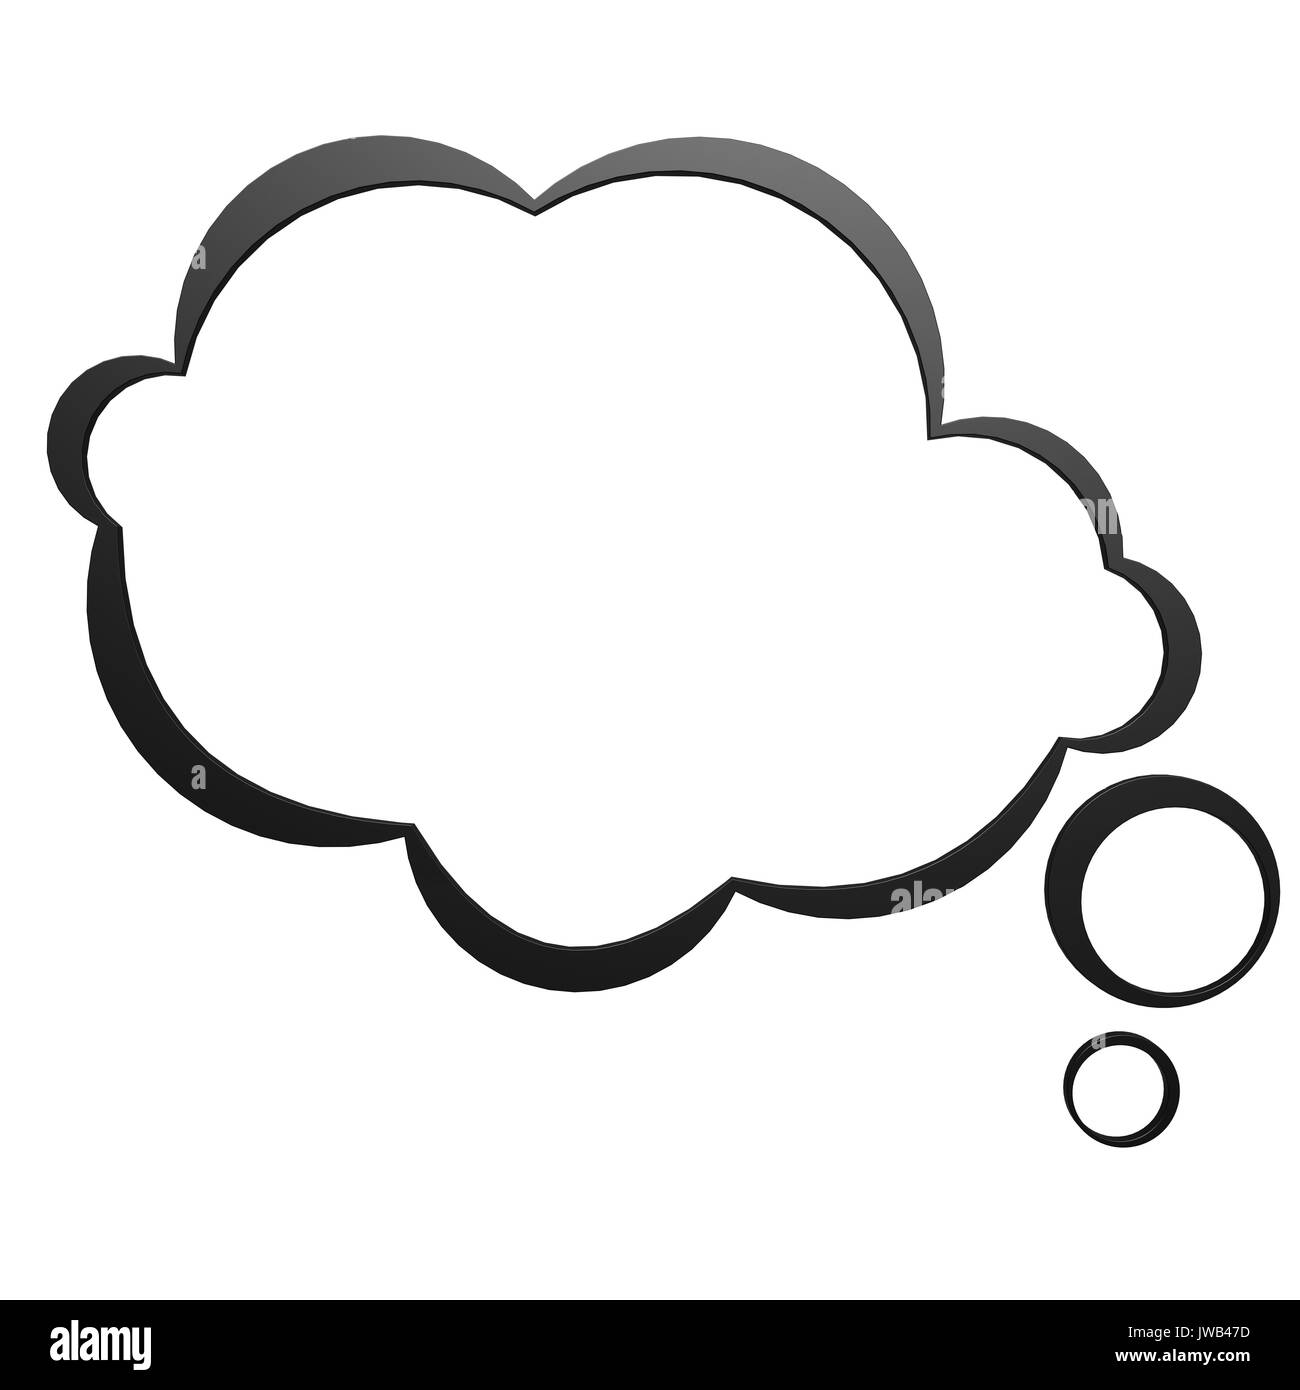 Thought bubble cartoon image with hi-res rendered artwork that could be used for any graphic design. Stock Photo